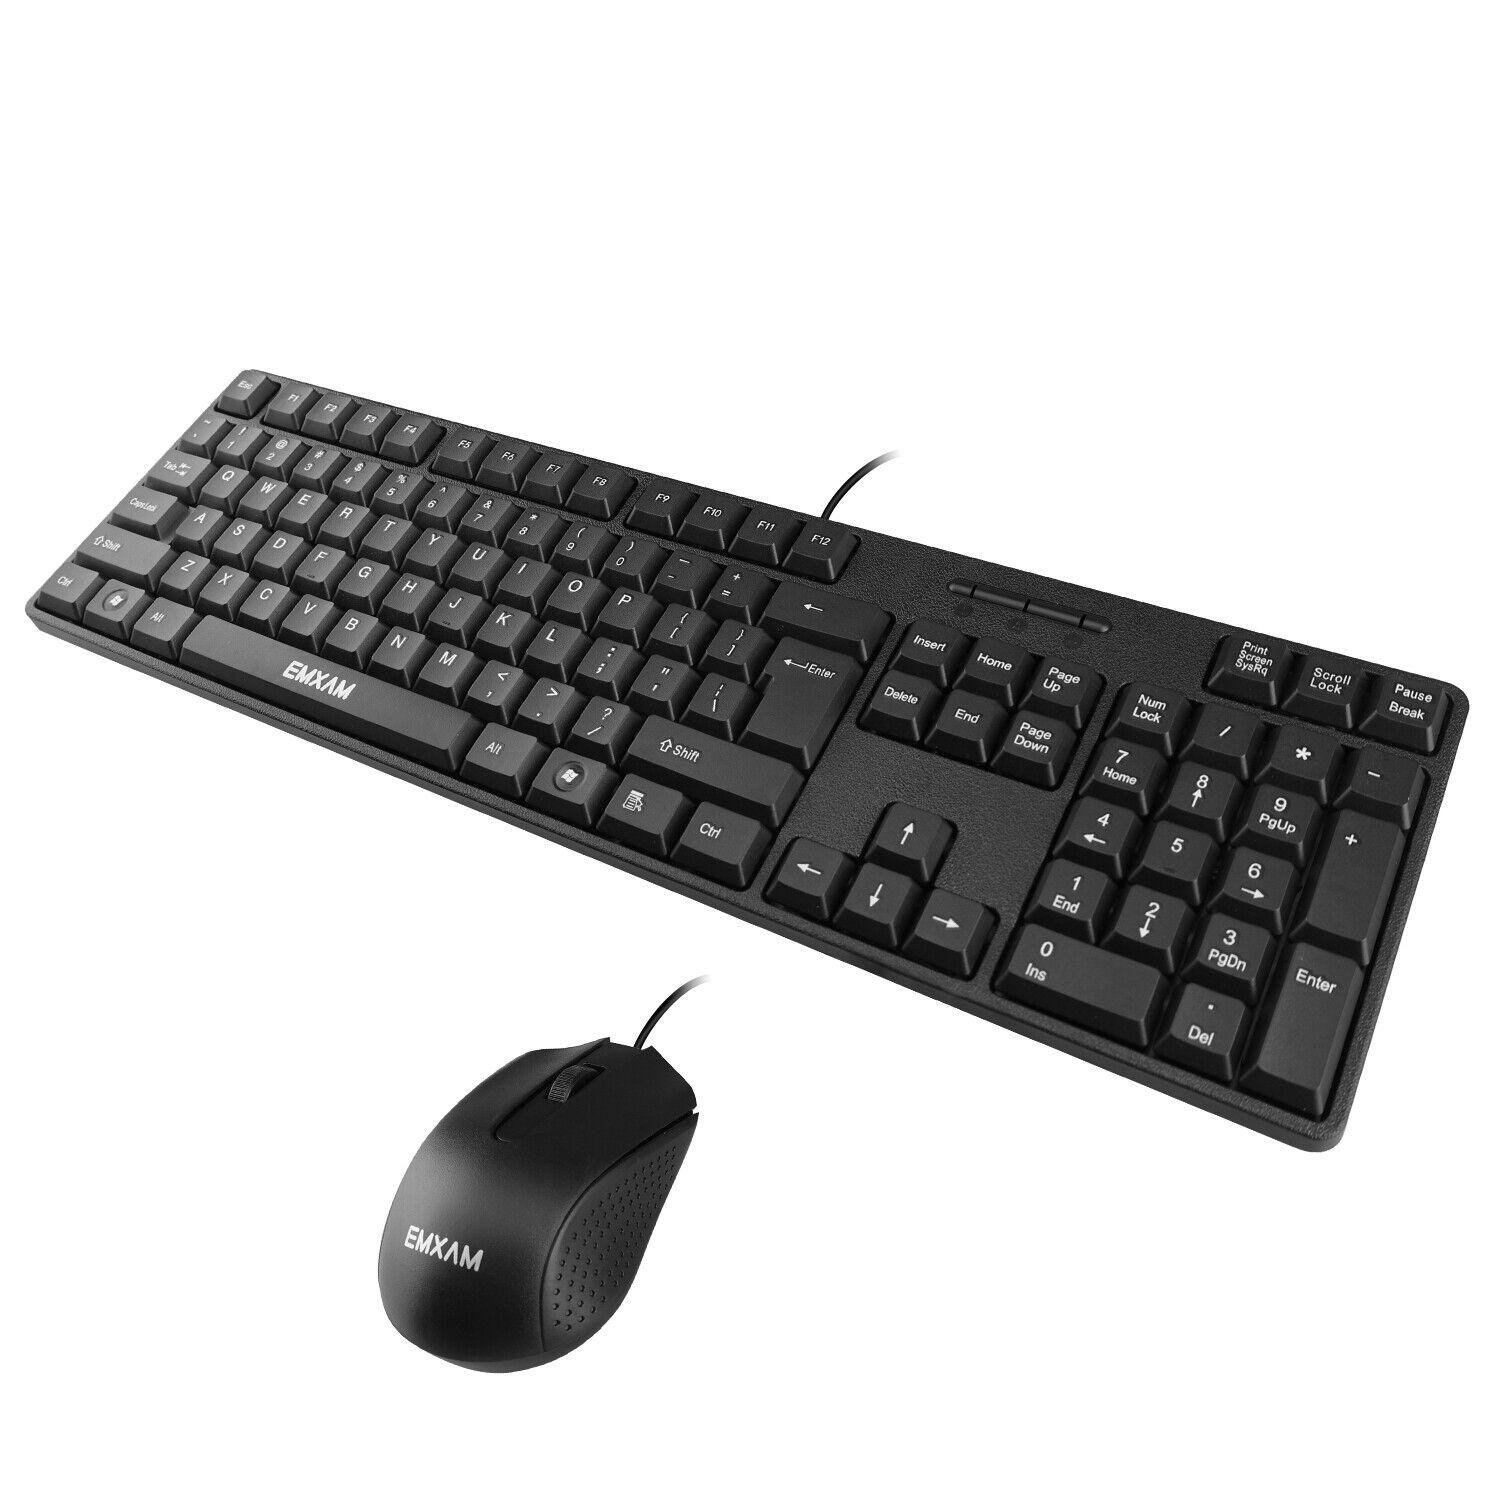 104 Keys USB Wired Quiet Computer Keyboard Mouse Kit For Computer Desktop PC US